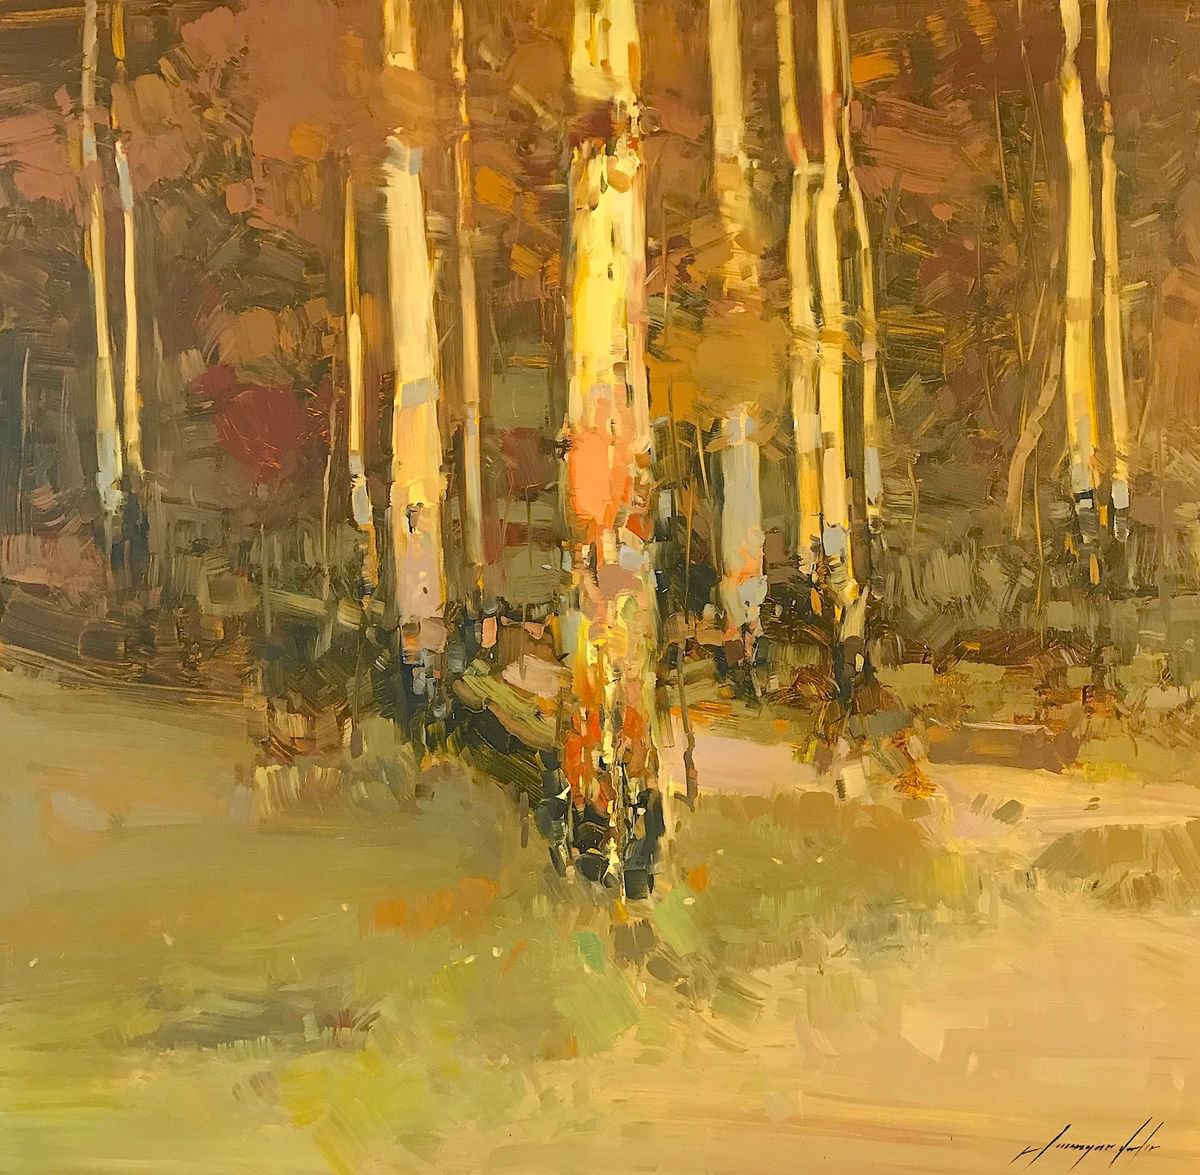 Birches Trees, Original oil painting, One of a kind Signed by Vahe Yeremyan